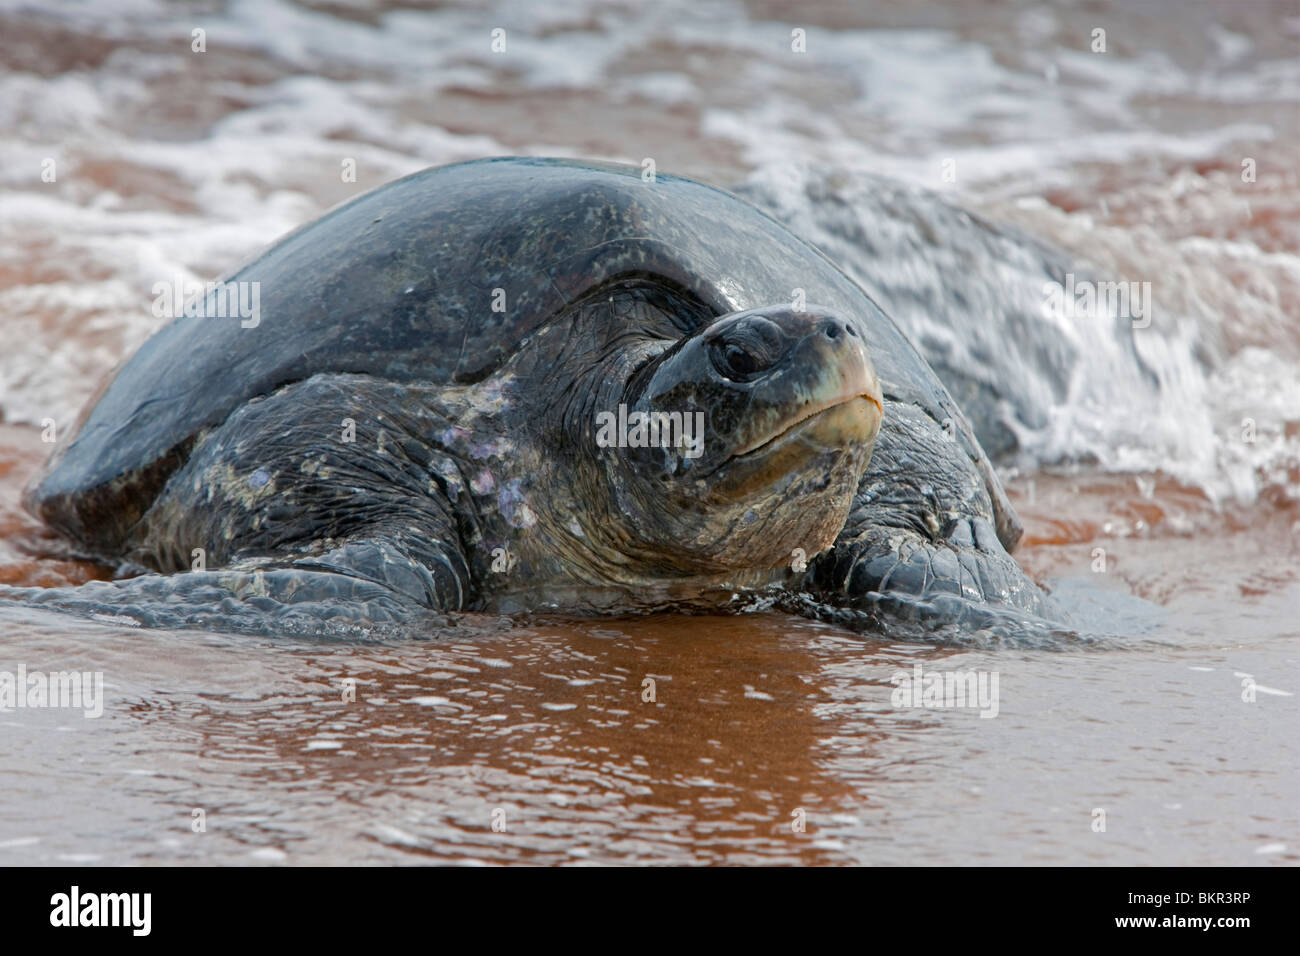 Galapagos Islands, A large Pacific green turtle in shallow water off Bartolome Island. Stock Photo